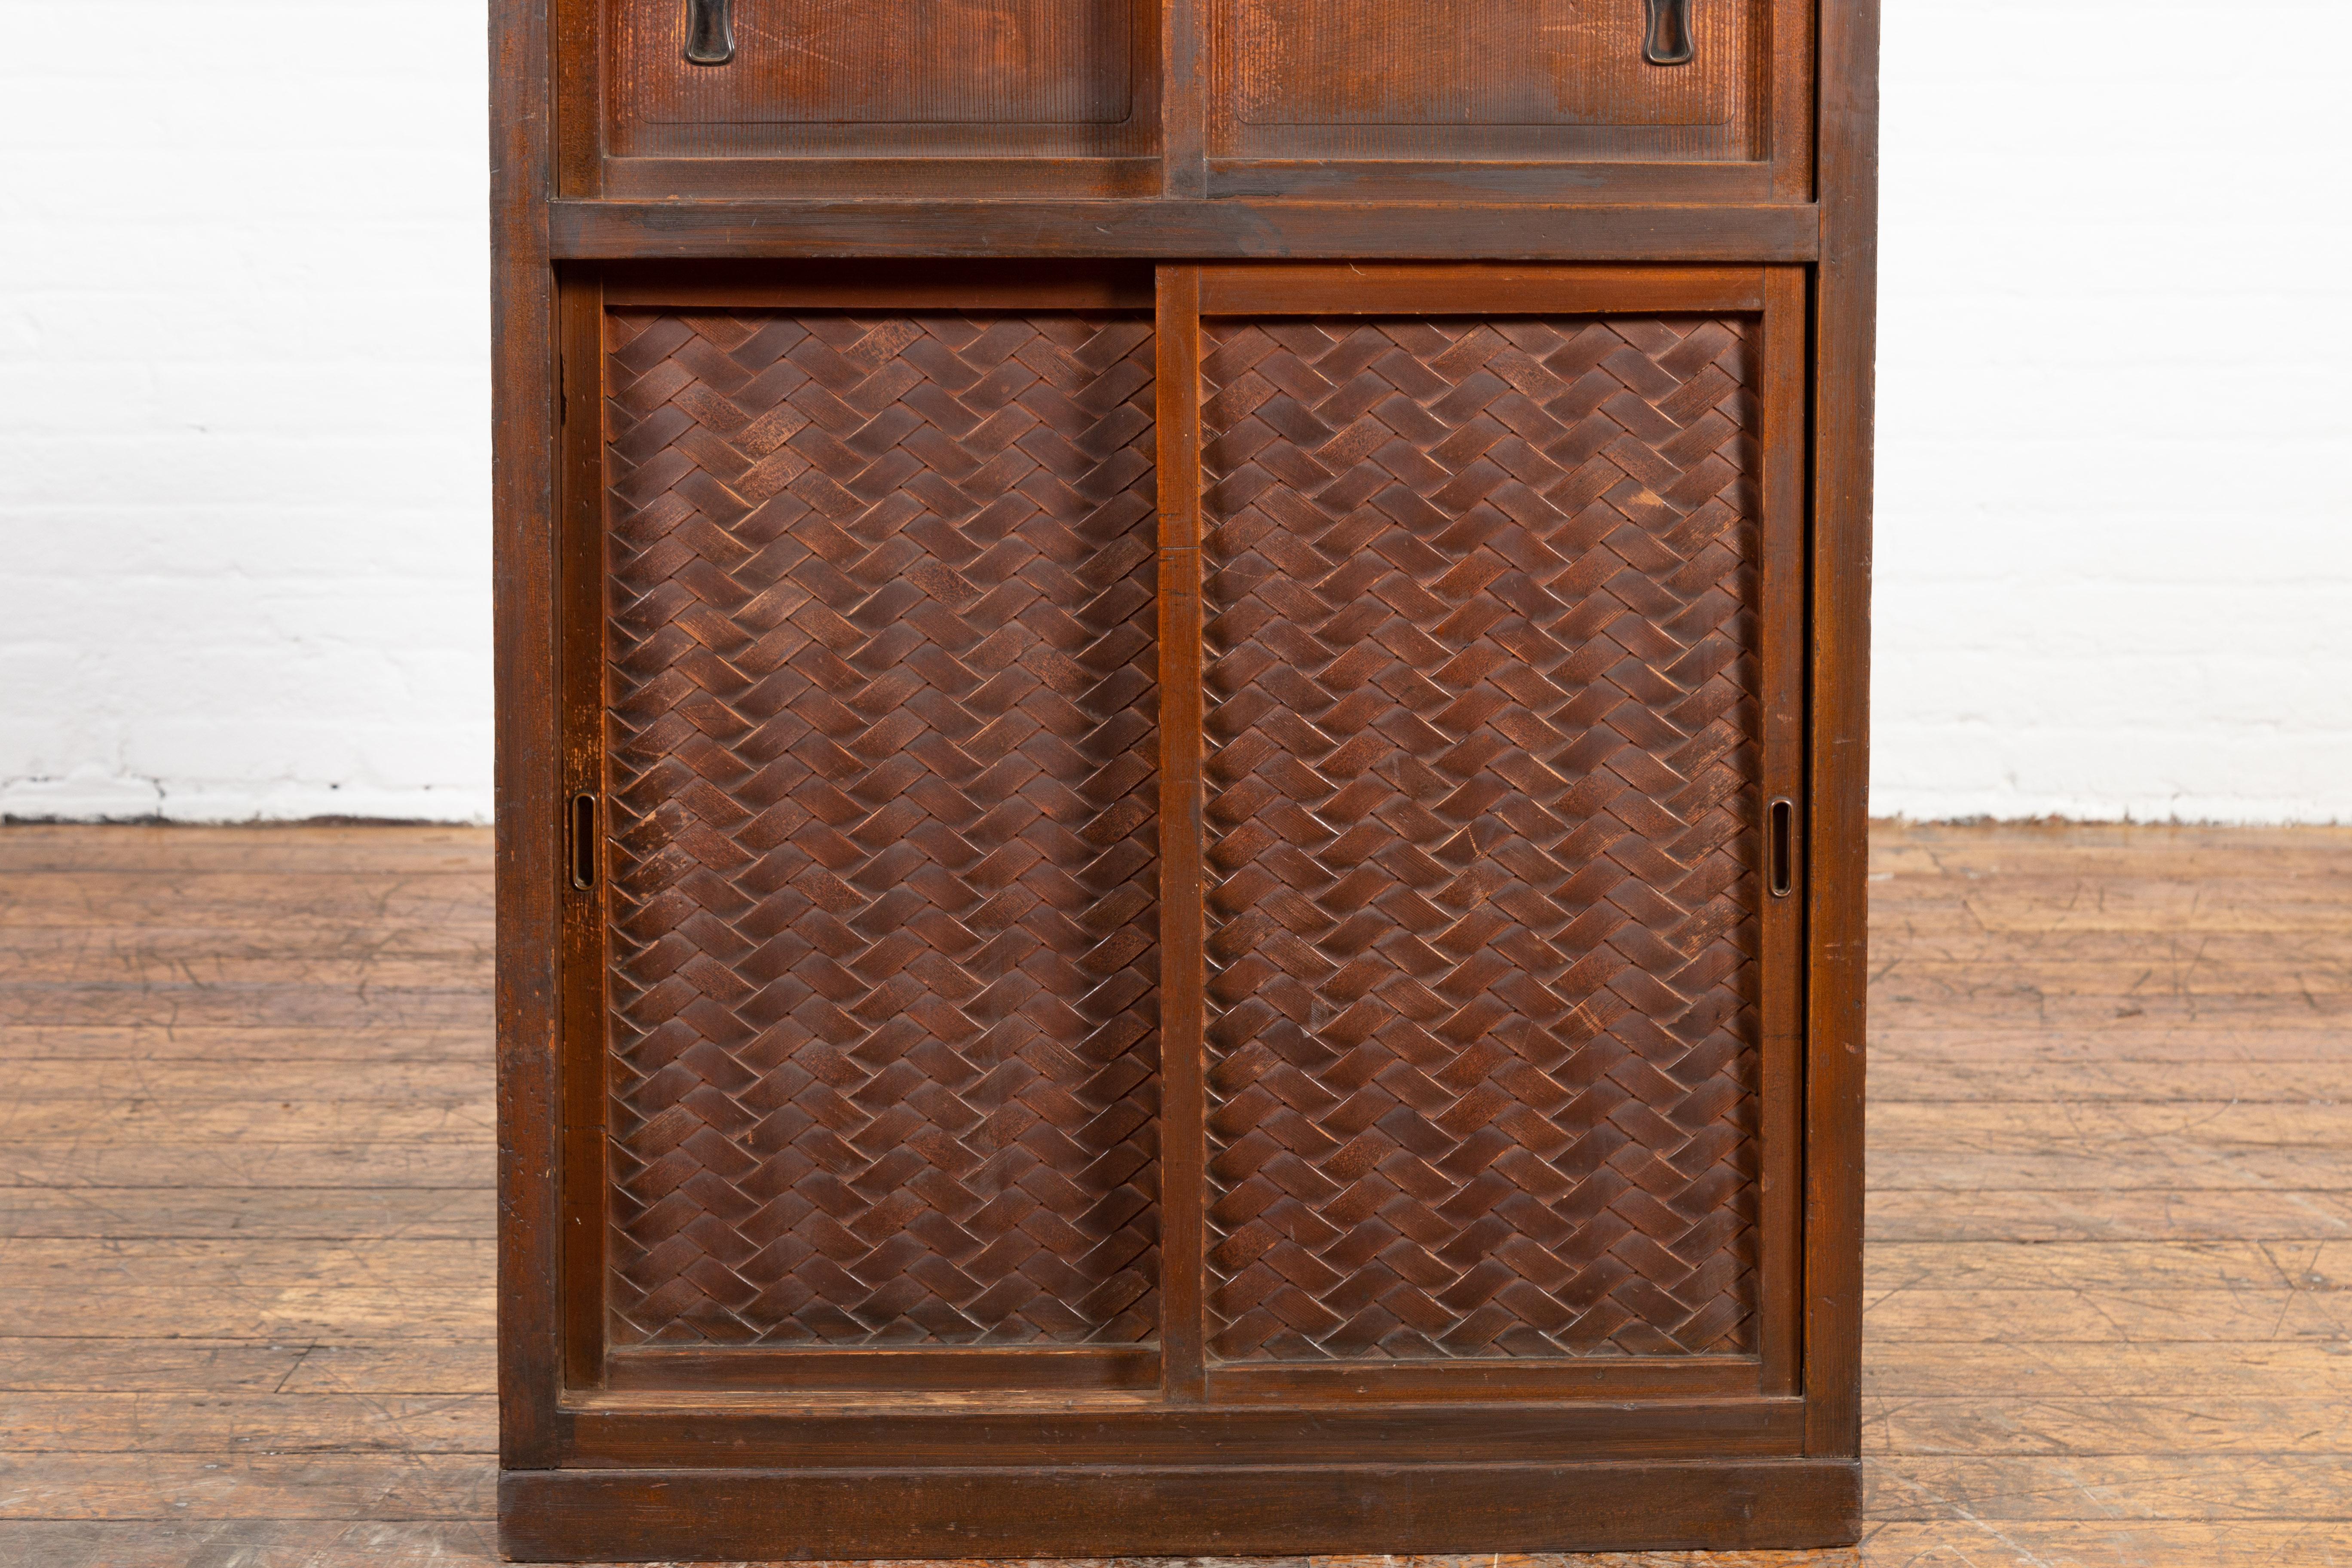 Wood Japanese 19th Century Cabinet with Sliding Doors and Woven Criss-Cross Design